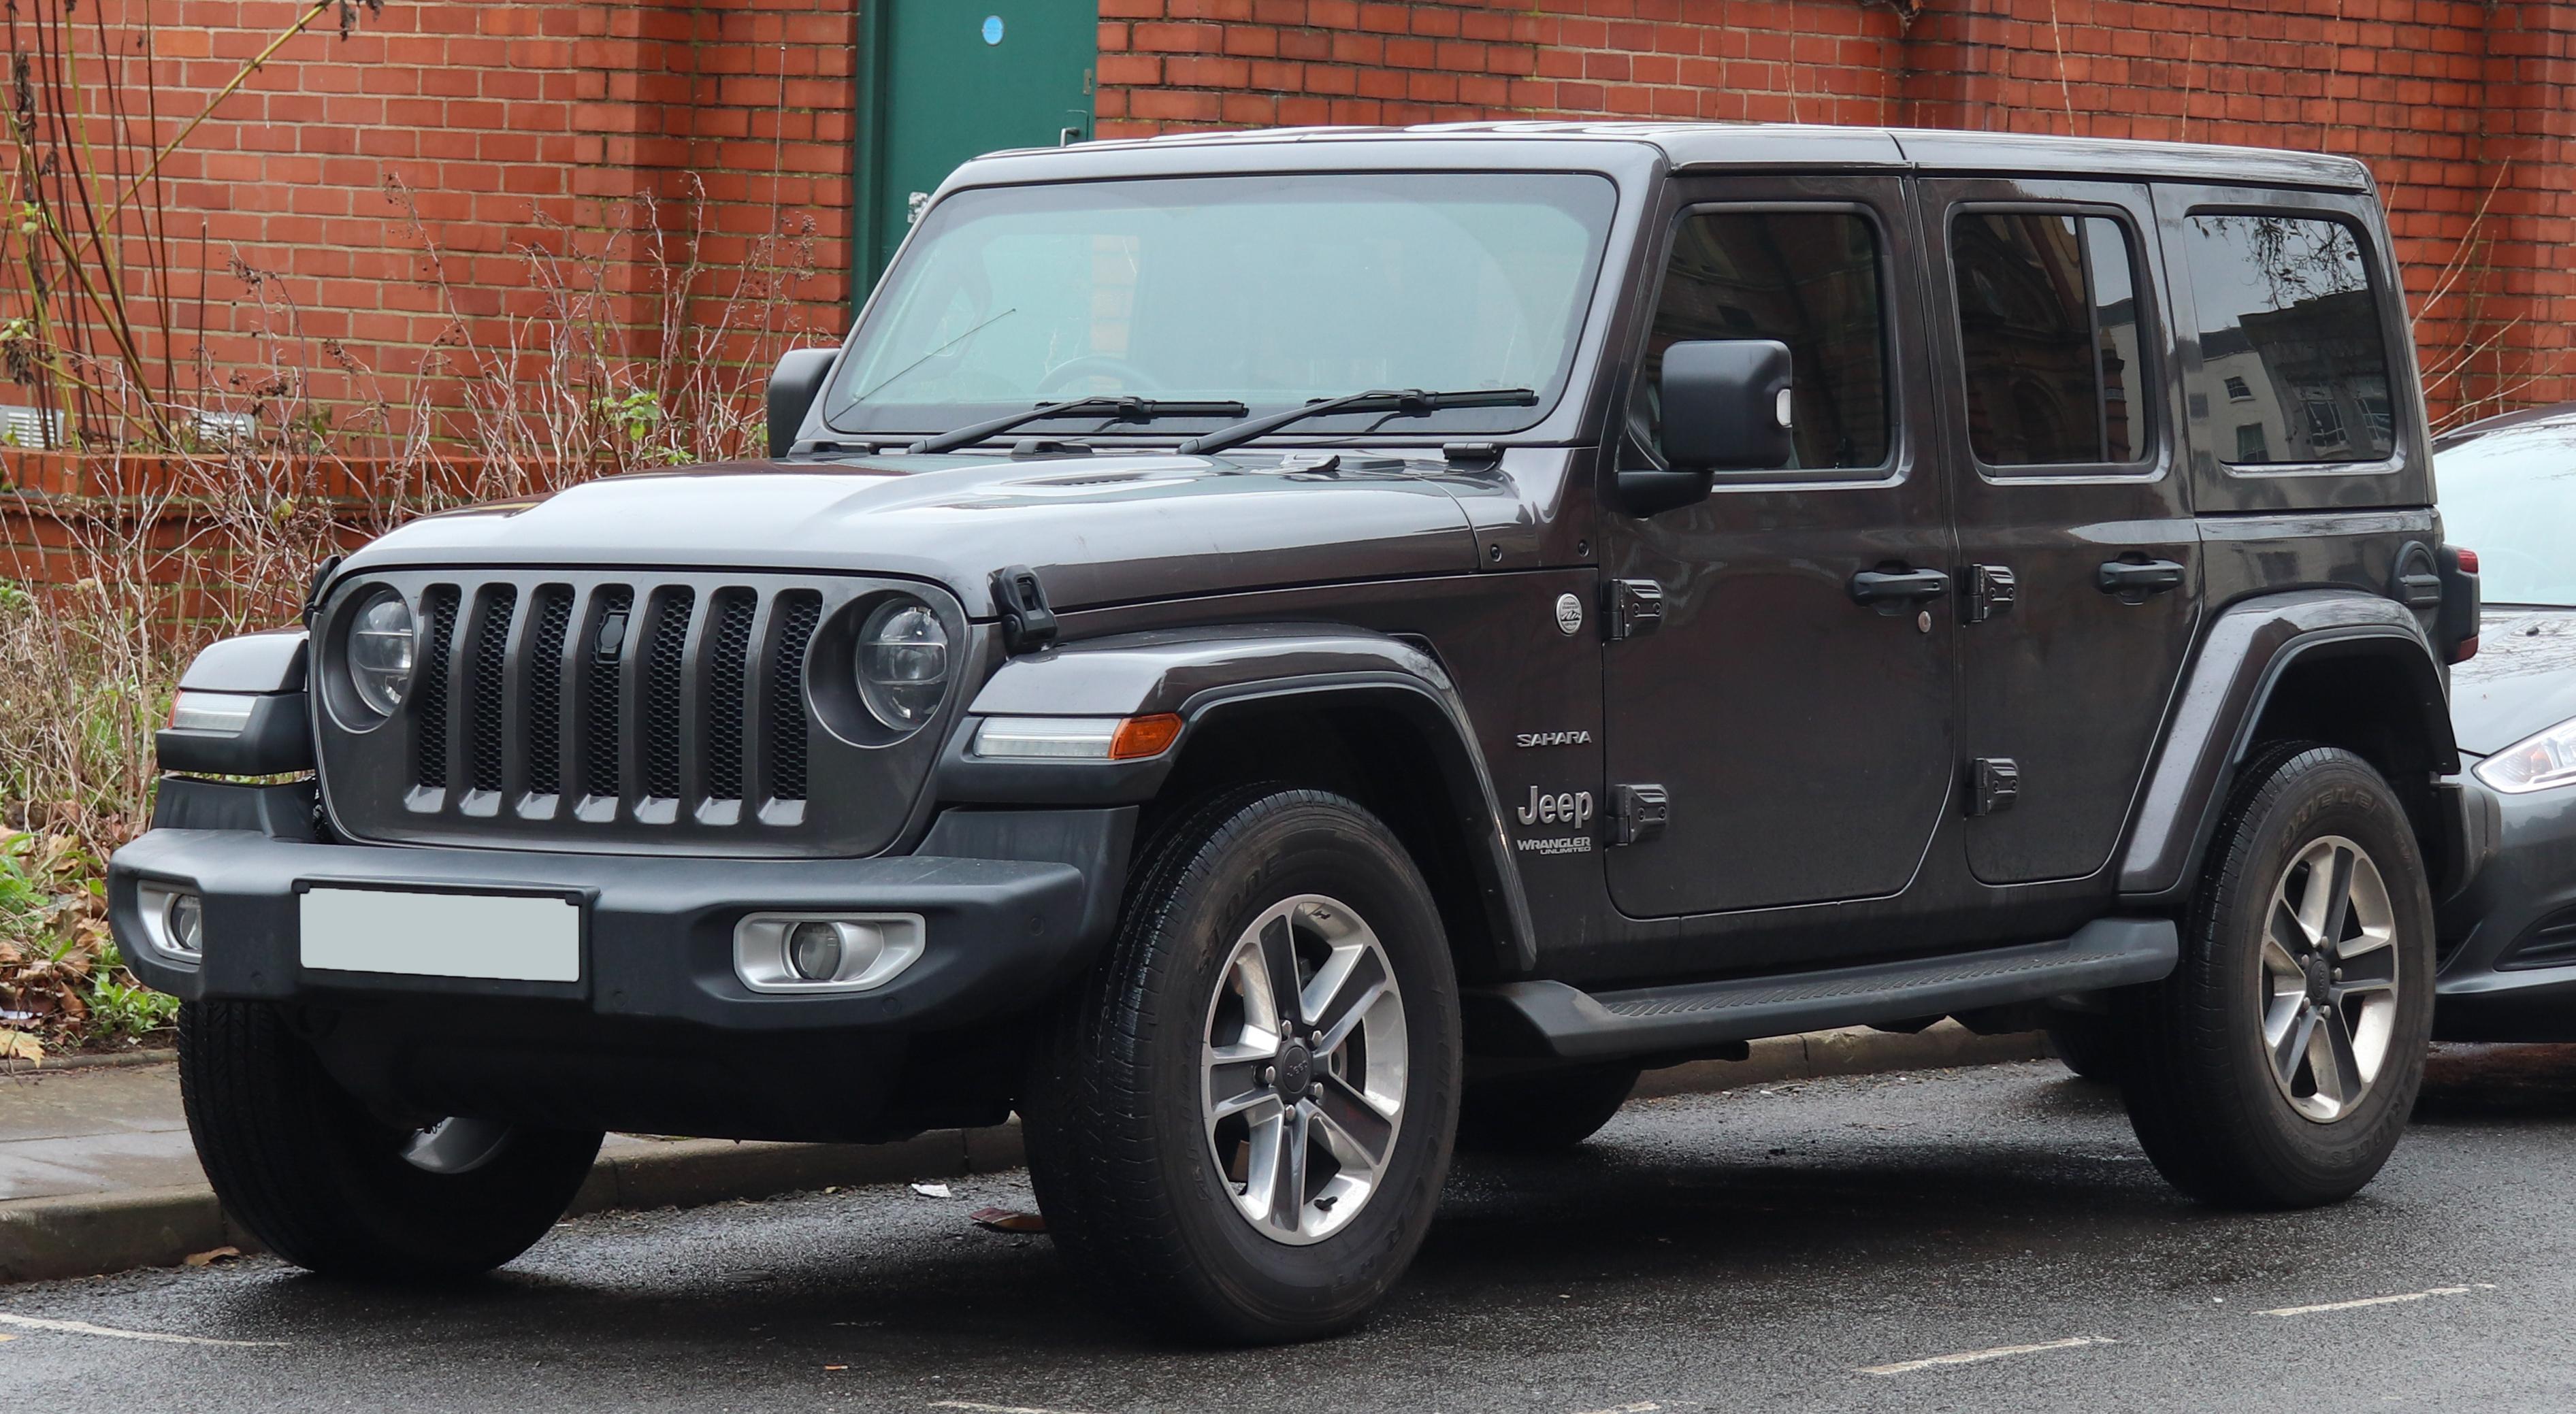 Popular Tire Brands for⁣ Jeep Wranglers